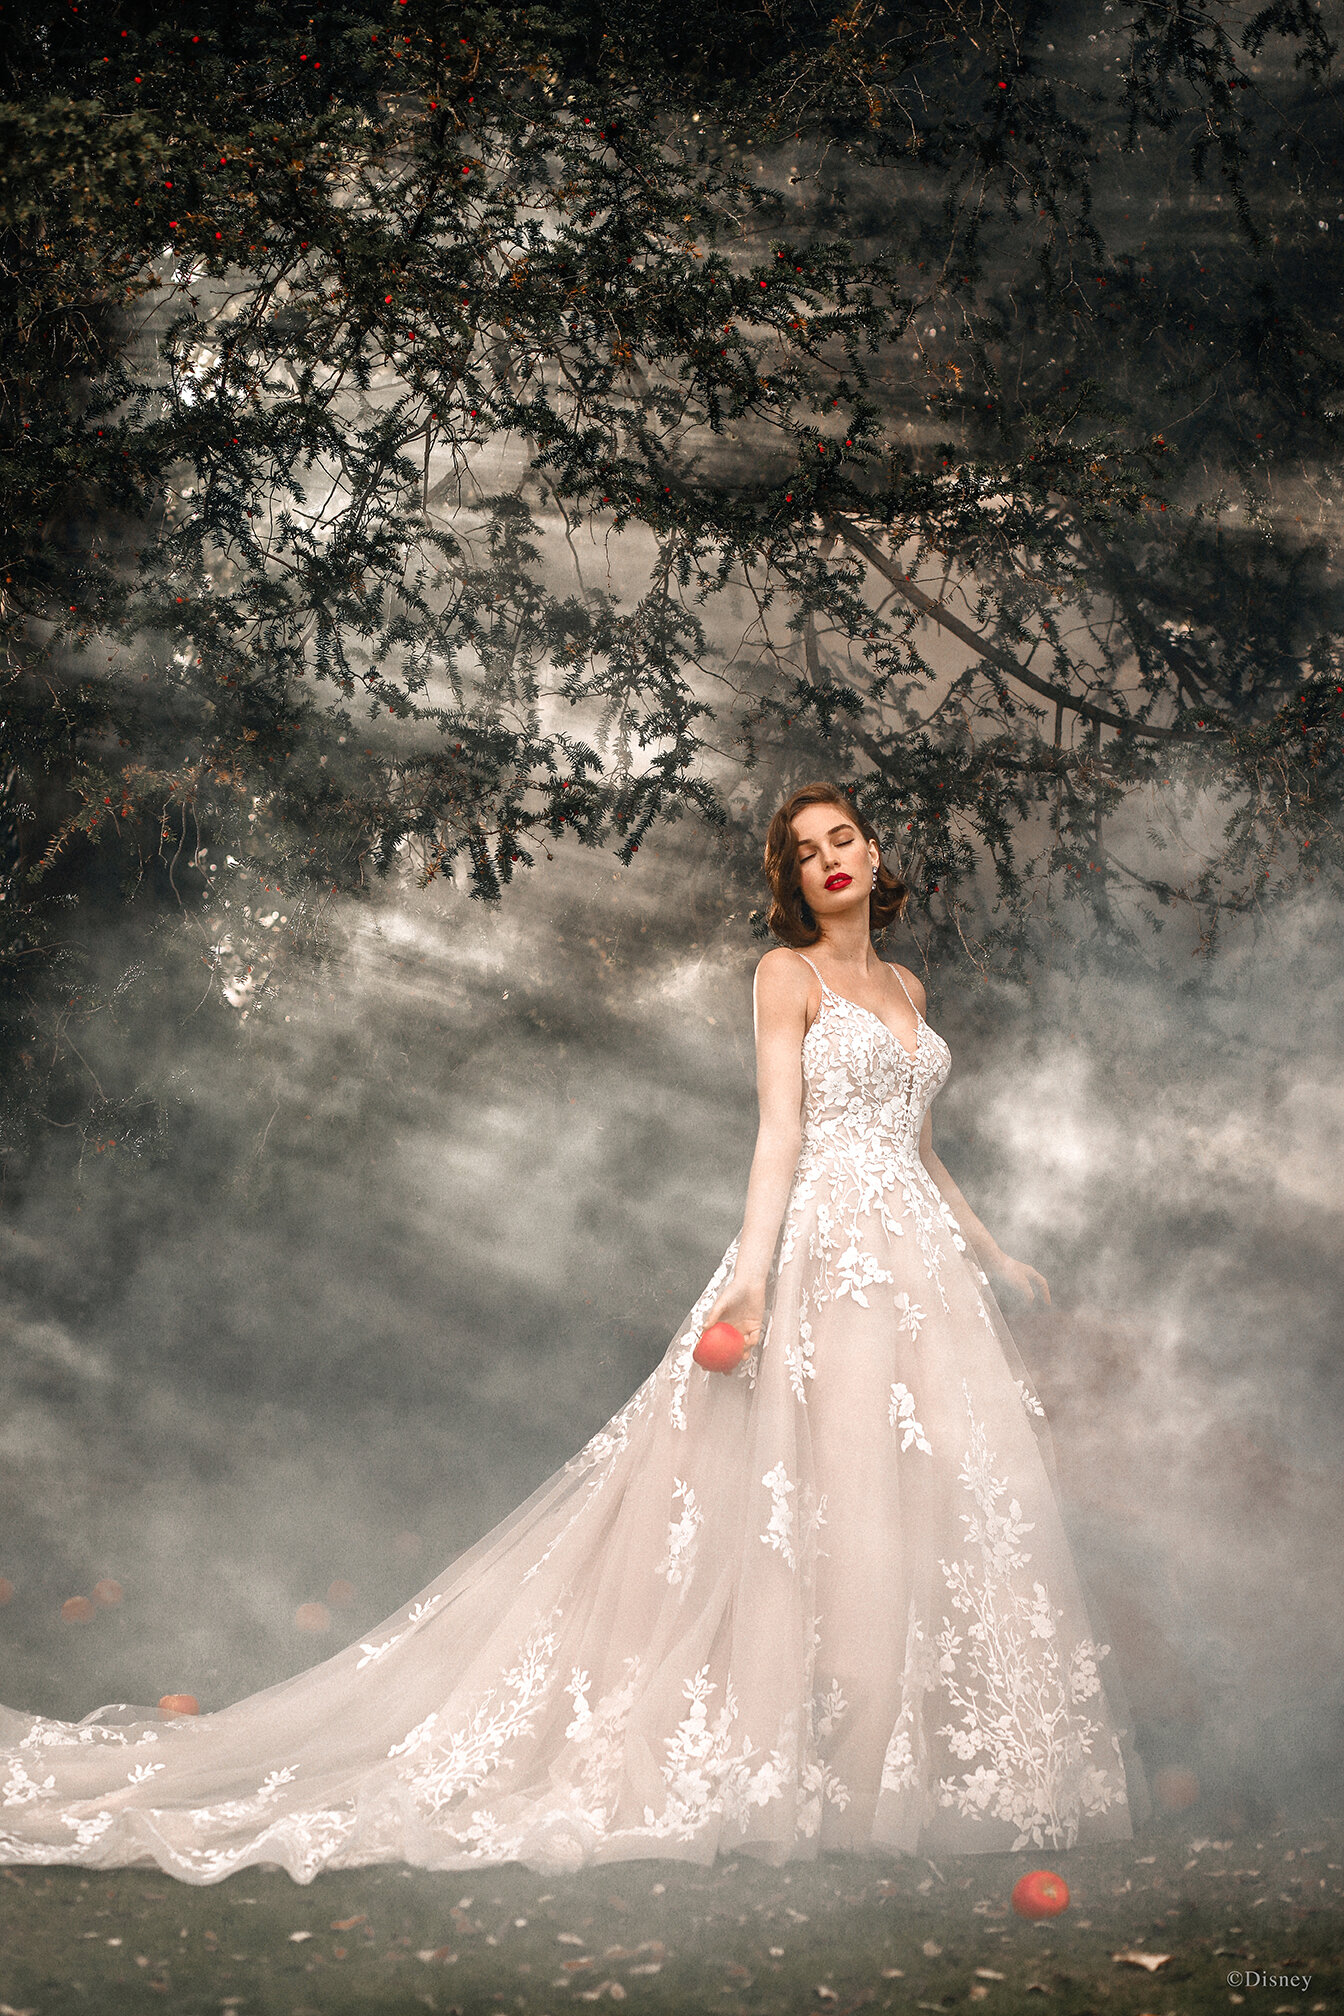 2023 Disney Fairy Tale Weddings Collection of Wedding Dresses to be  Revealed During Fashion Show on February 10th | Disney Weddings